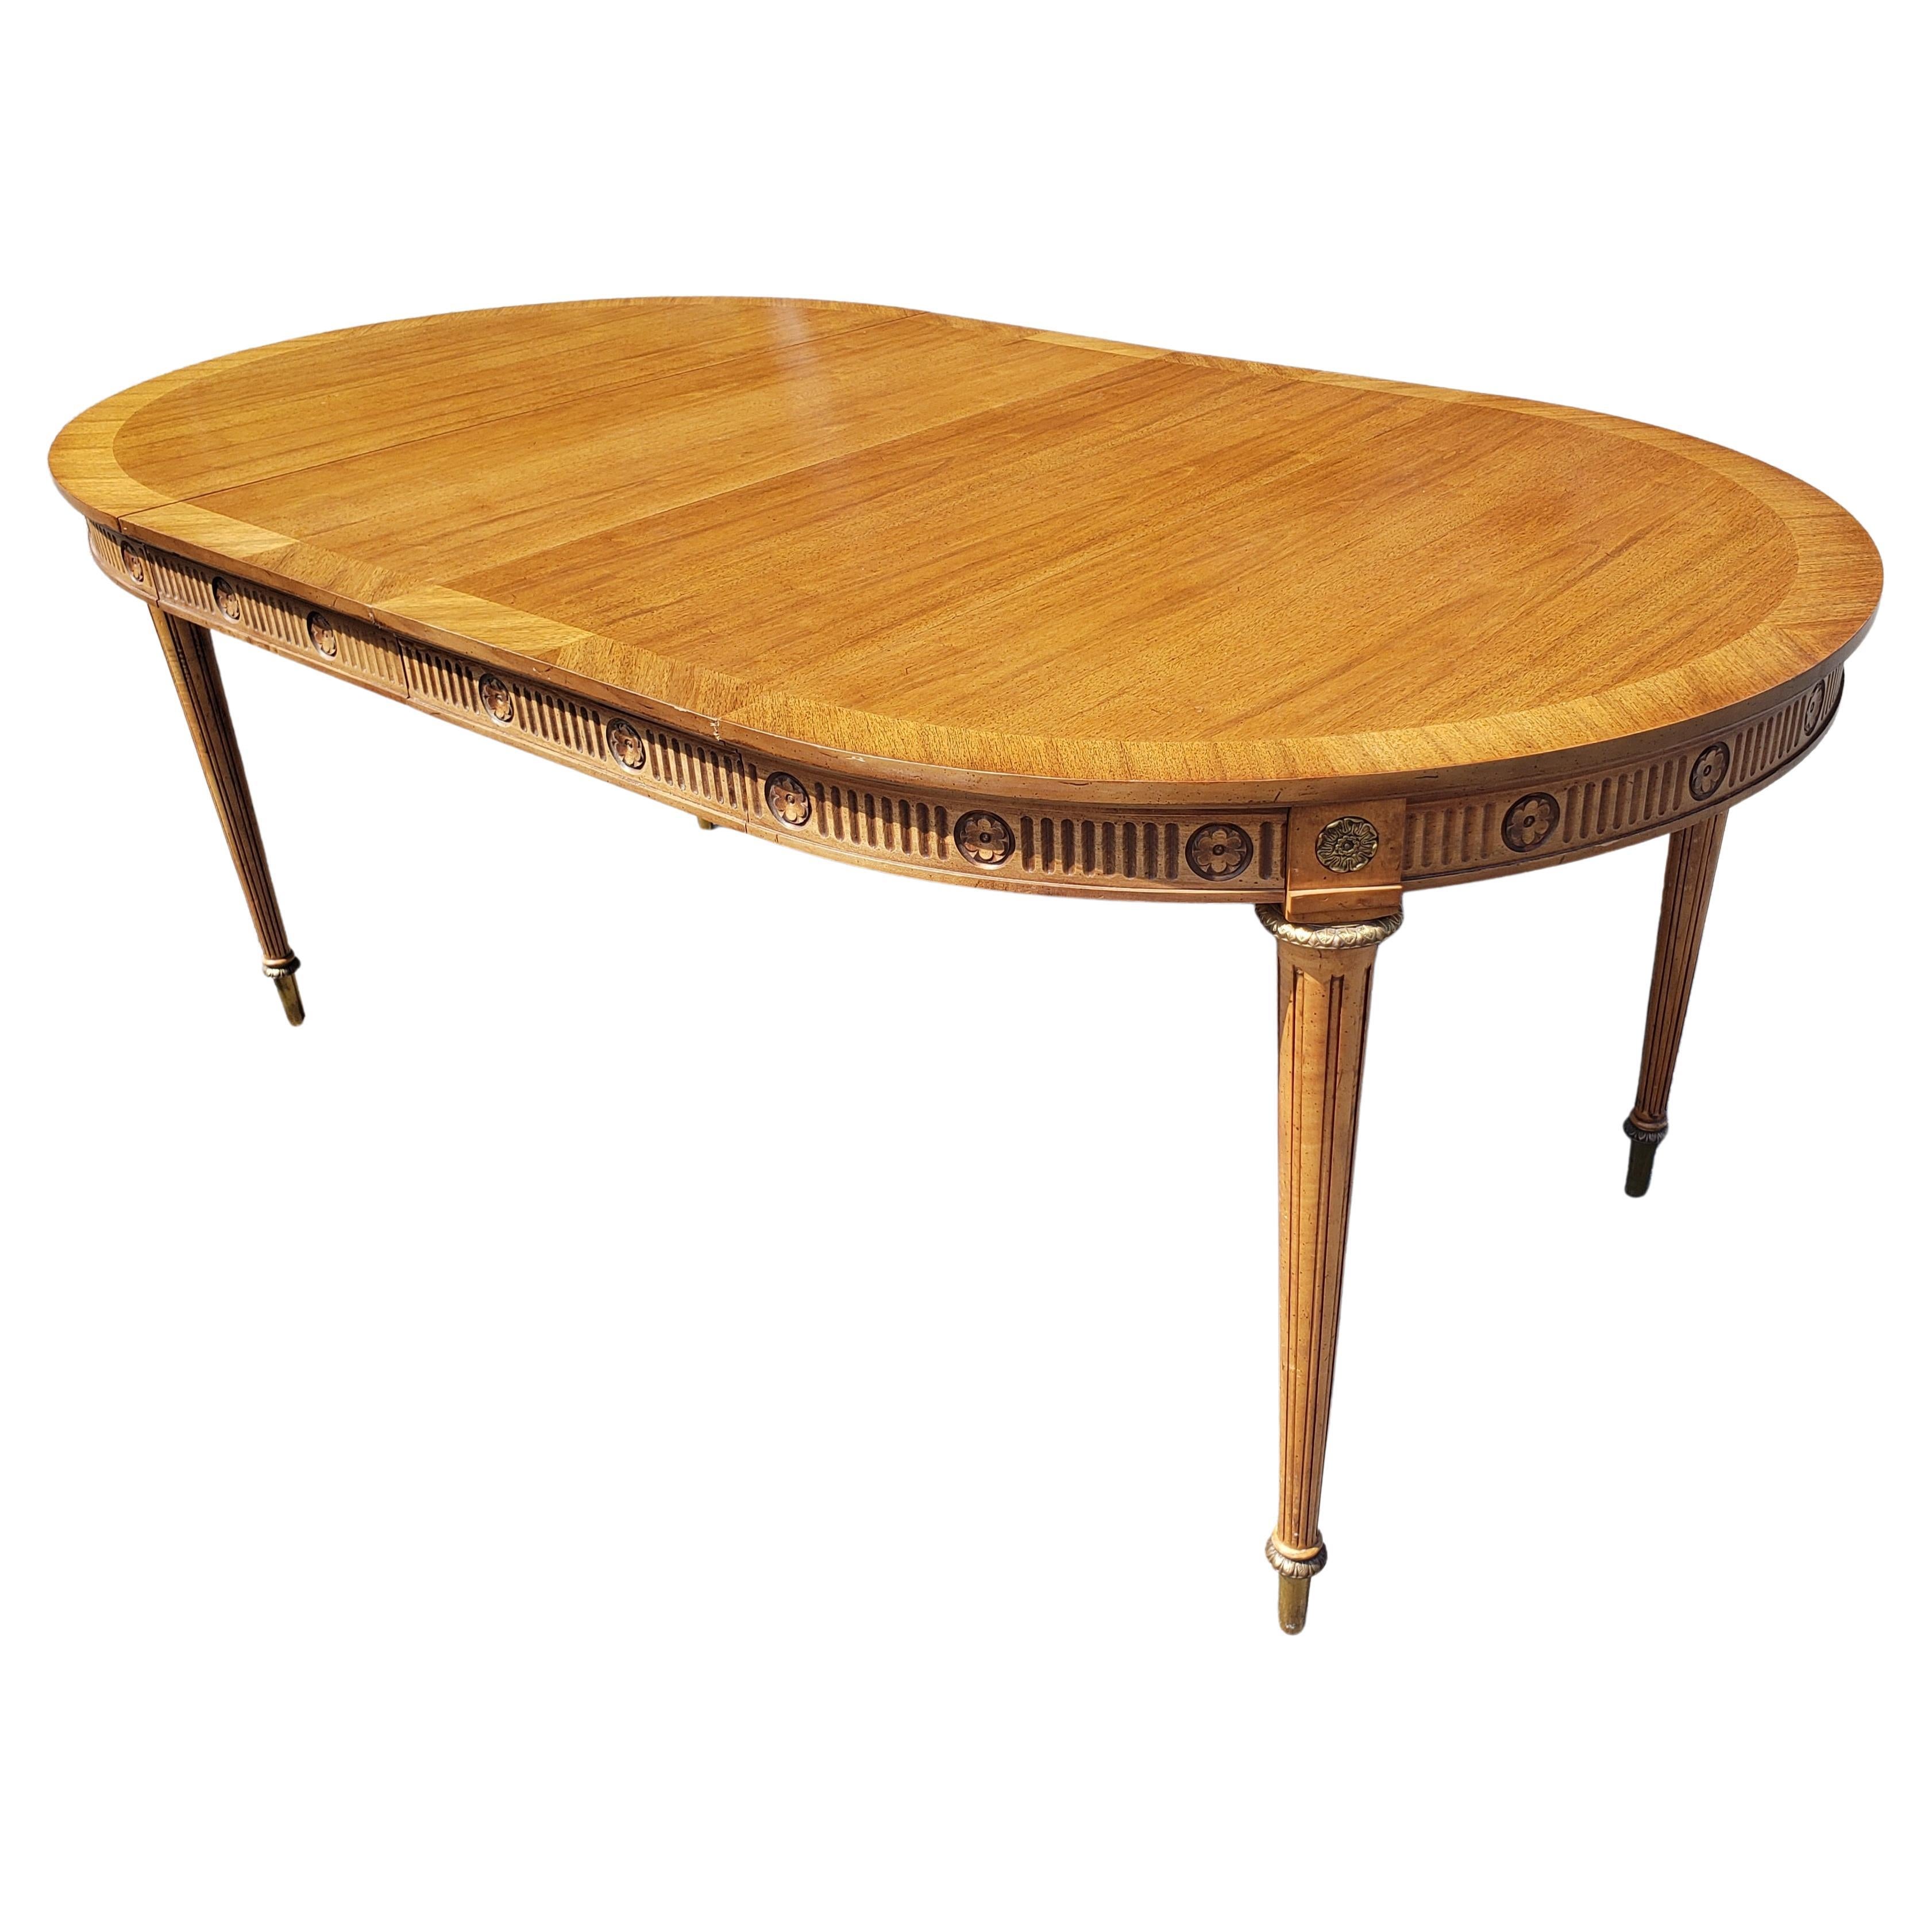 20th Century J.L. Metz Furniture French Walnut and Brass Extension Dining Table with 2 Leaves For Sale